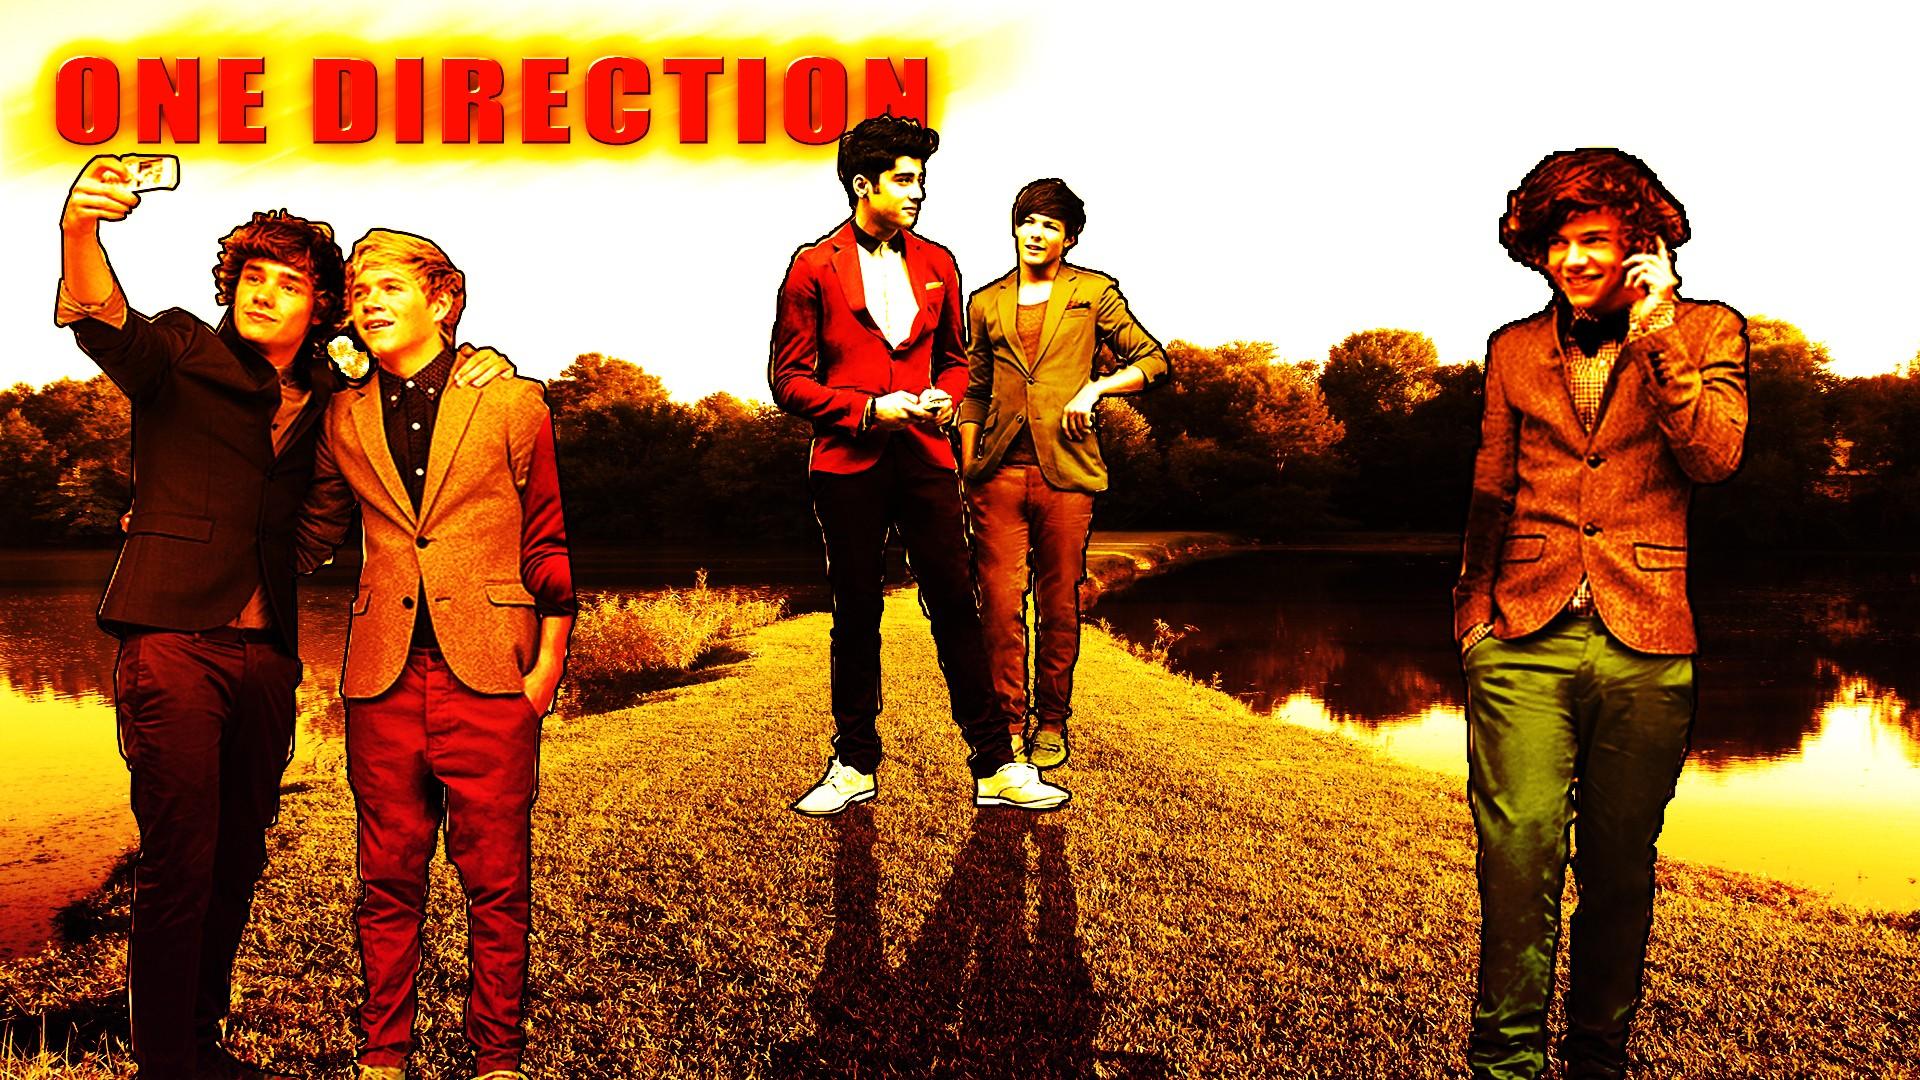 Free One Direction 2013 Full HD Image Picture Wallpaper Desktop PC 2013